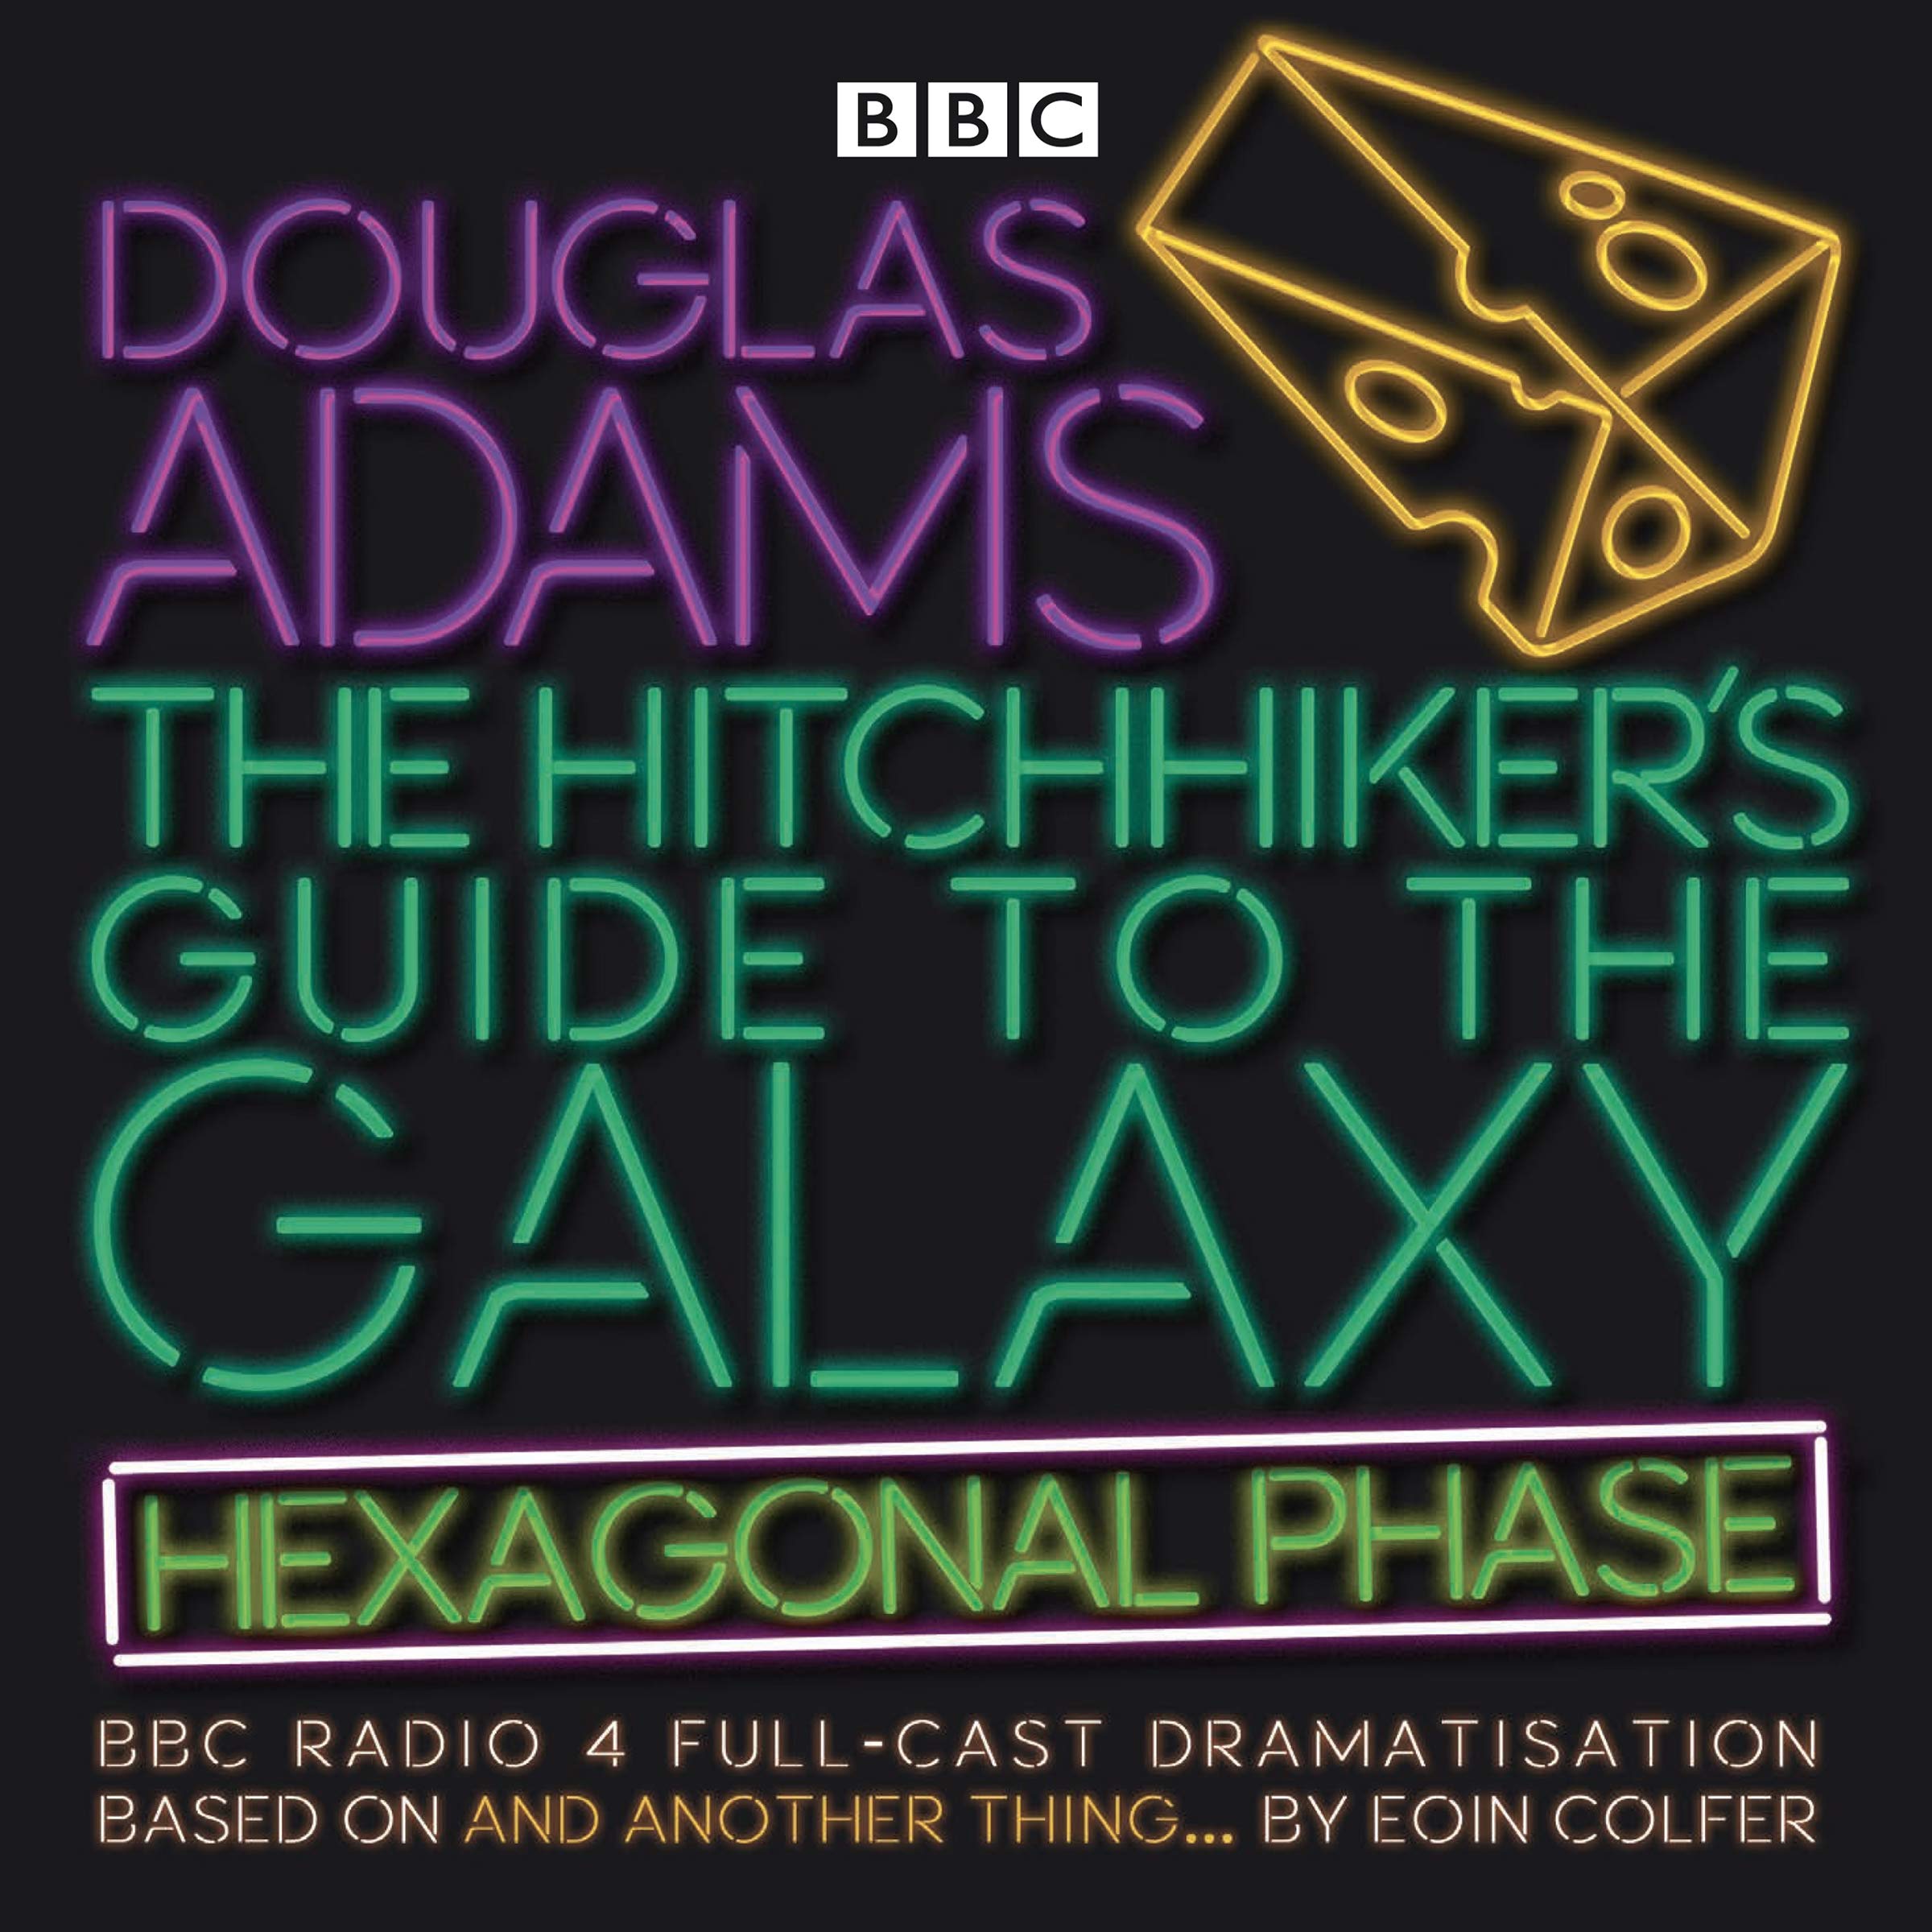 The Hitchhiker’s Guide to the Galaxy: Hexagonal Phase - Audio CD | Douglas Adams, Eoin Colfer